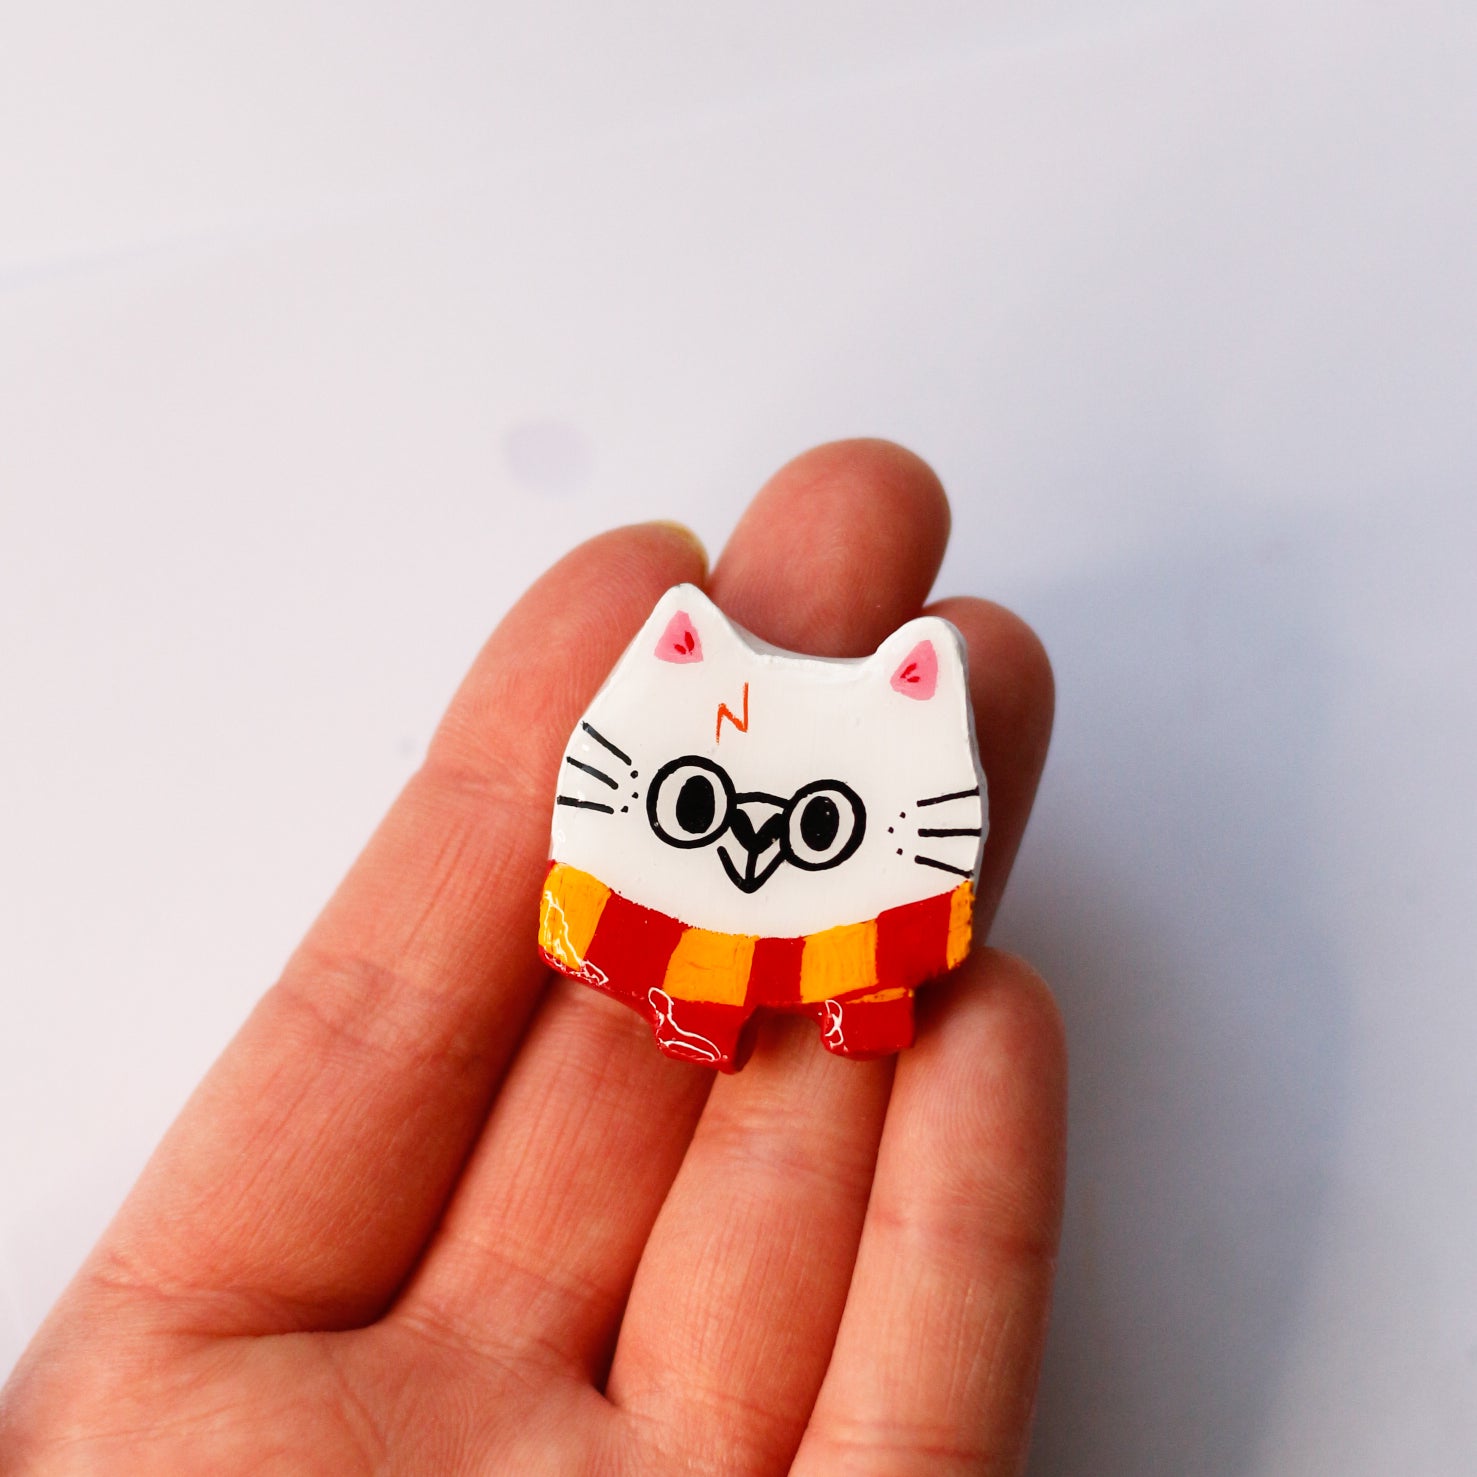 The meowship of the ring - Cat book stickers – My Sweet Paper Card